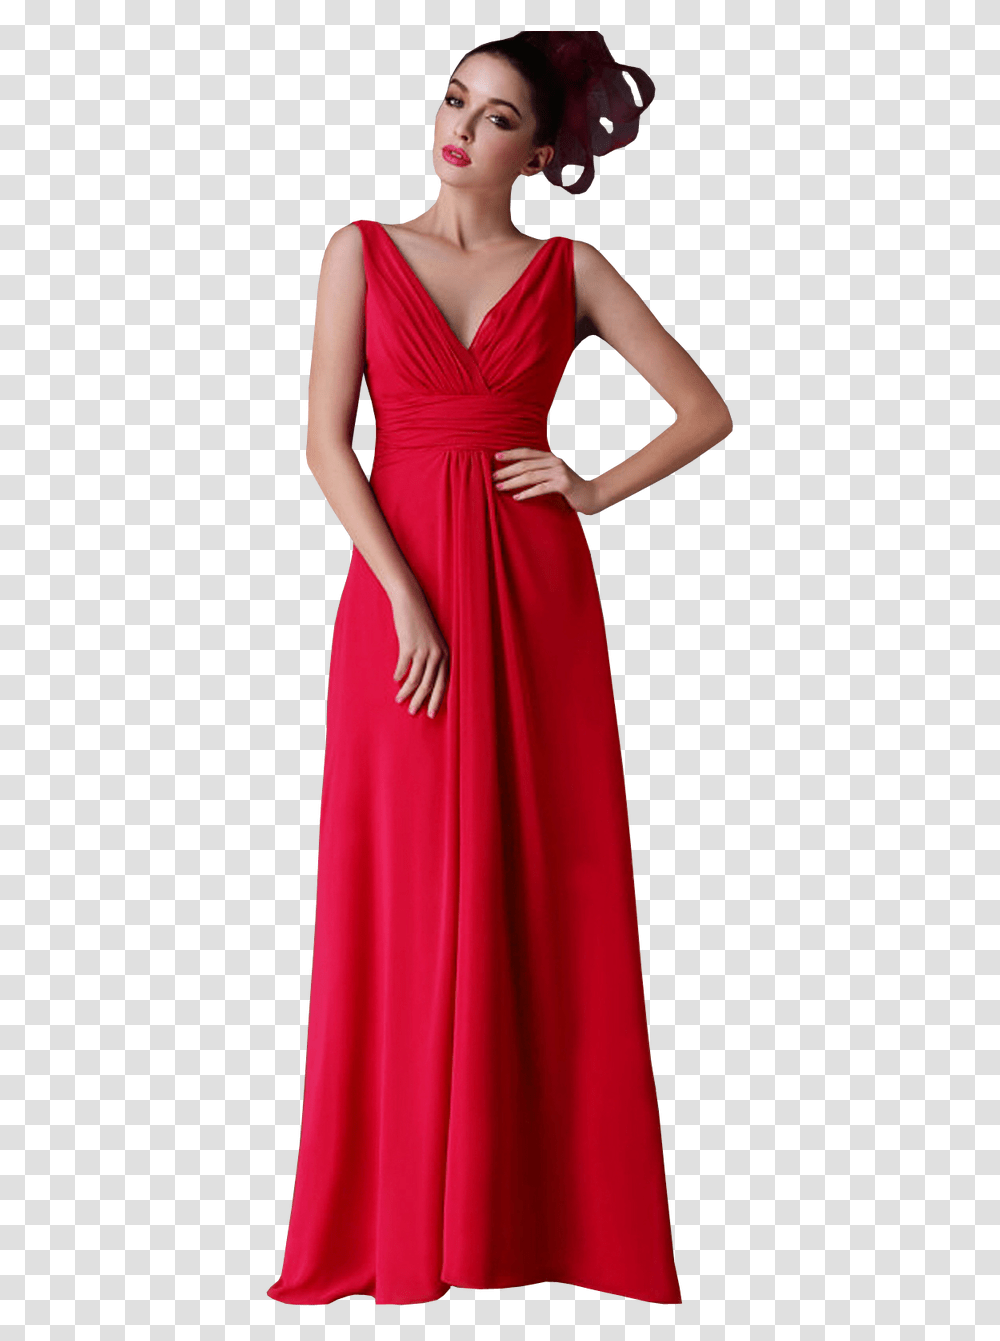 New V Neck Chiffon Party Prom Dress Gown, Clothing, Apparel, Evening Dress, Robe Transparent Png